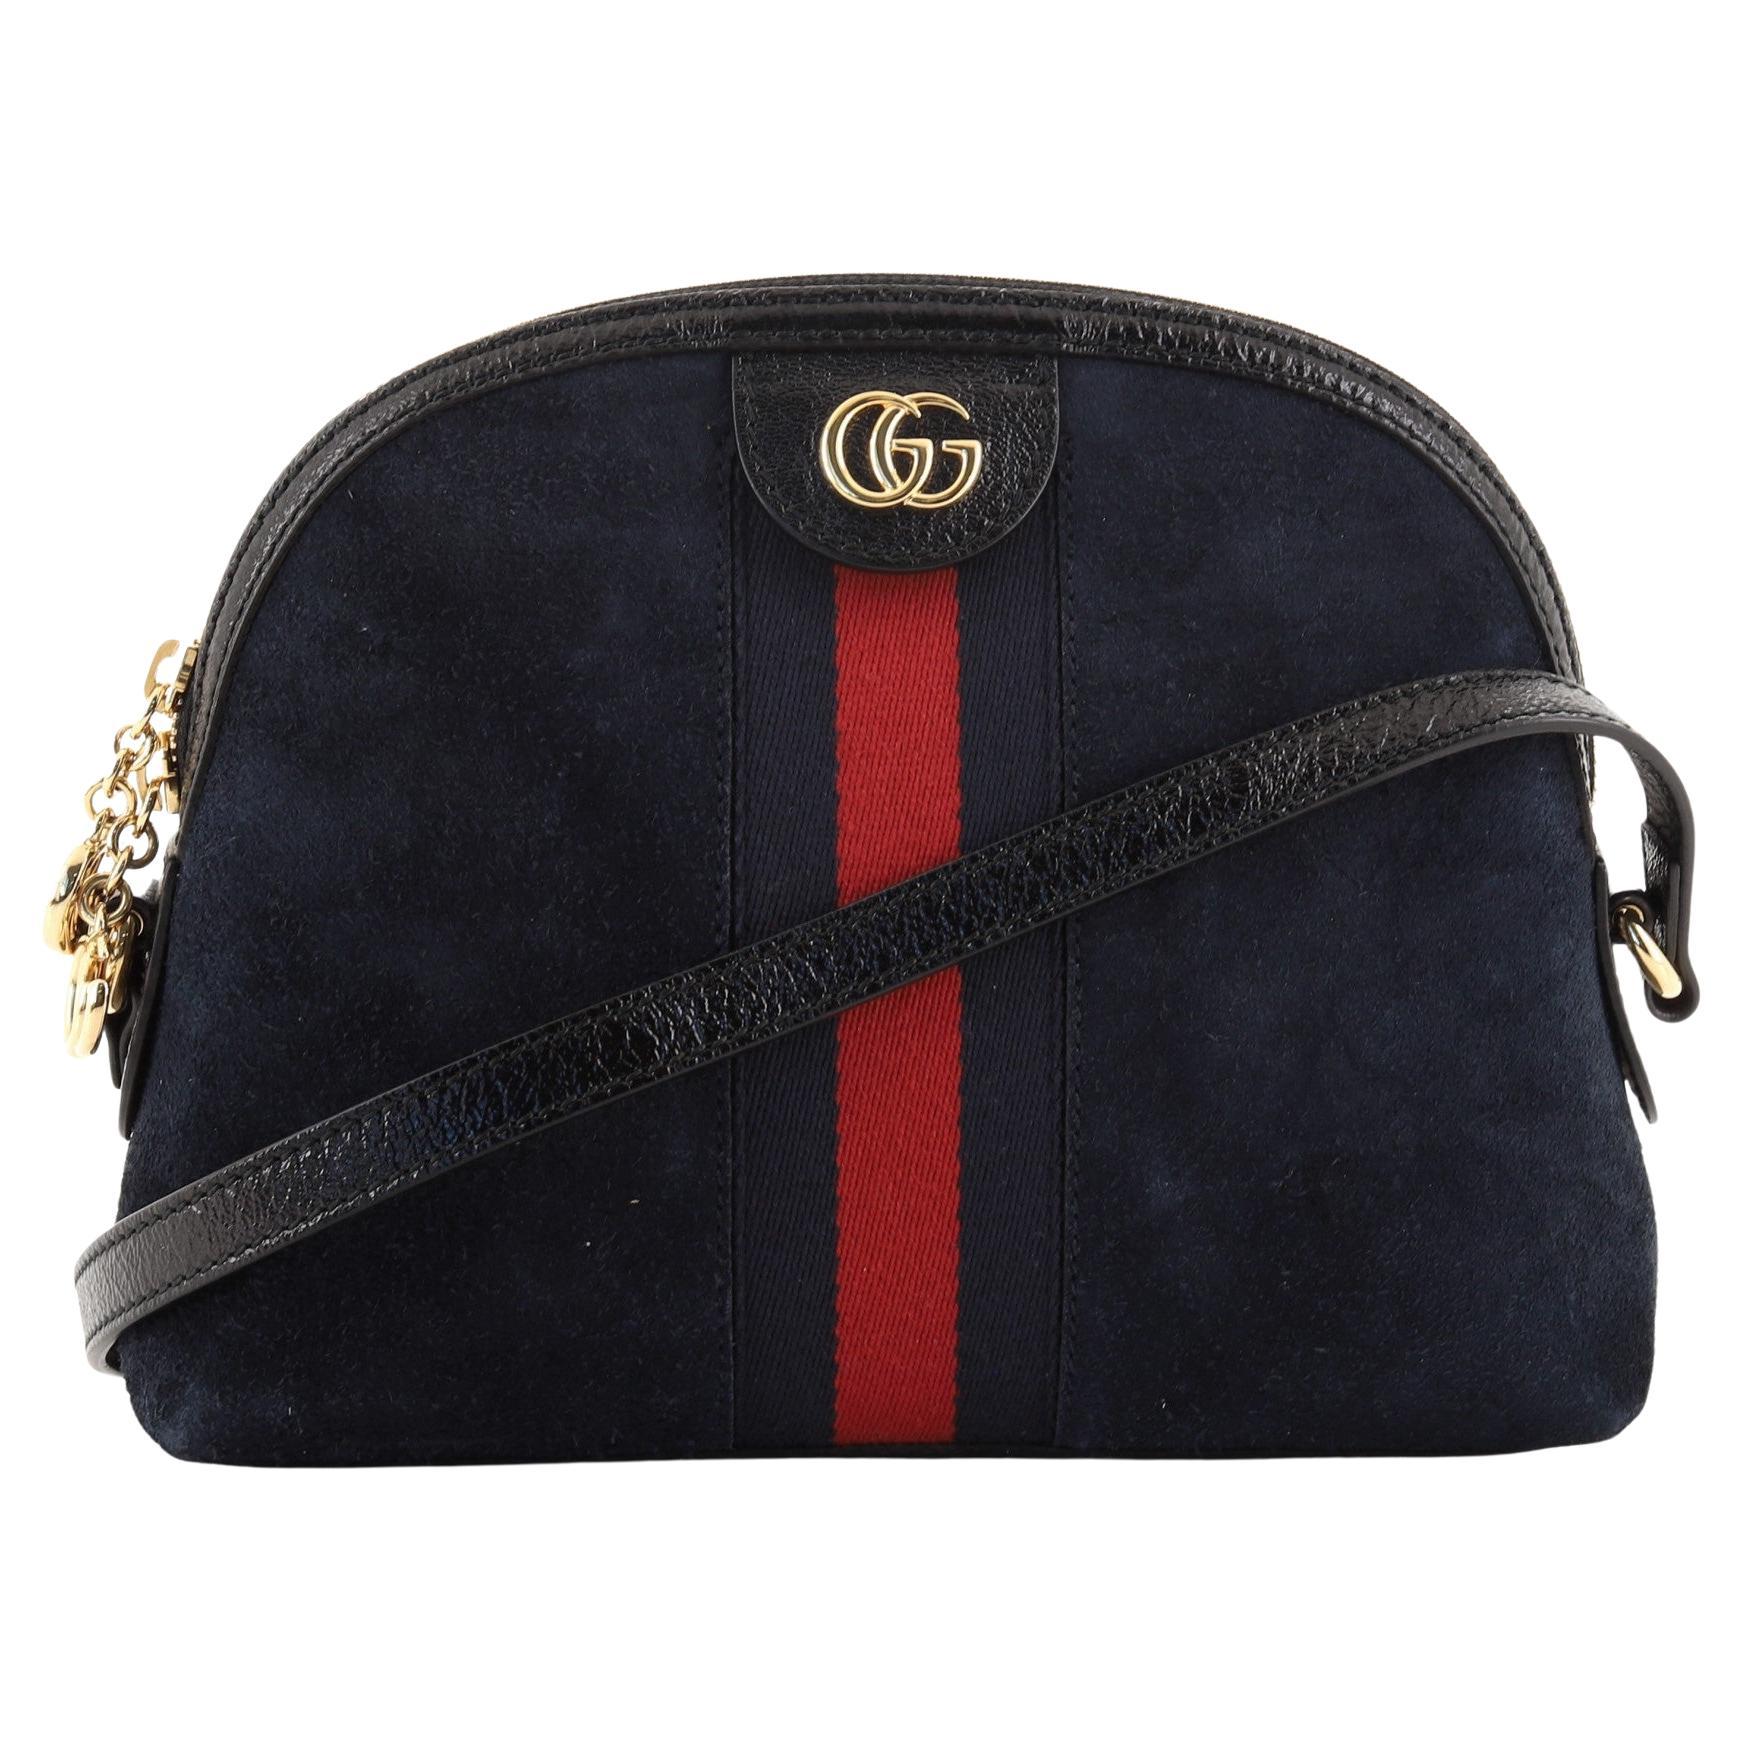 Gucci Ophidia Dome Shoulder Bag Suede Small